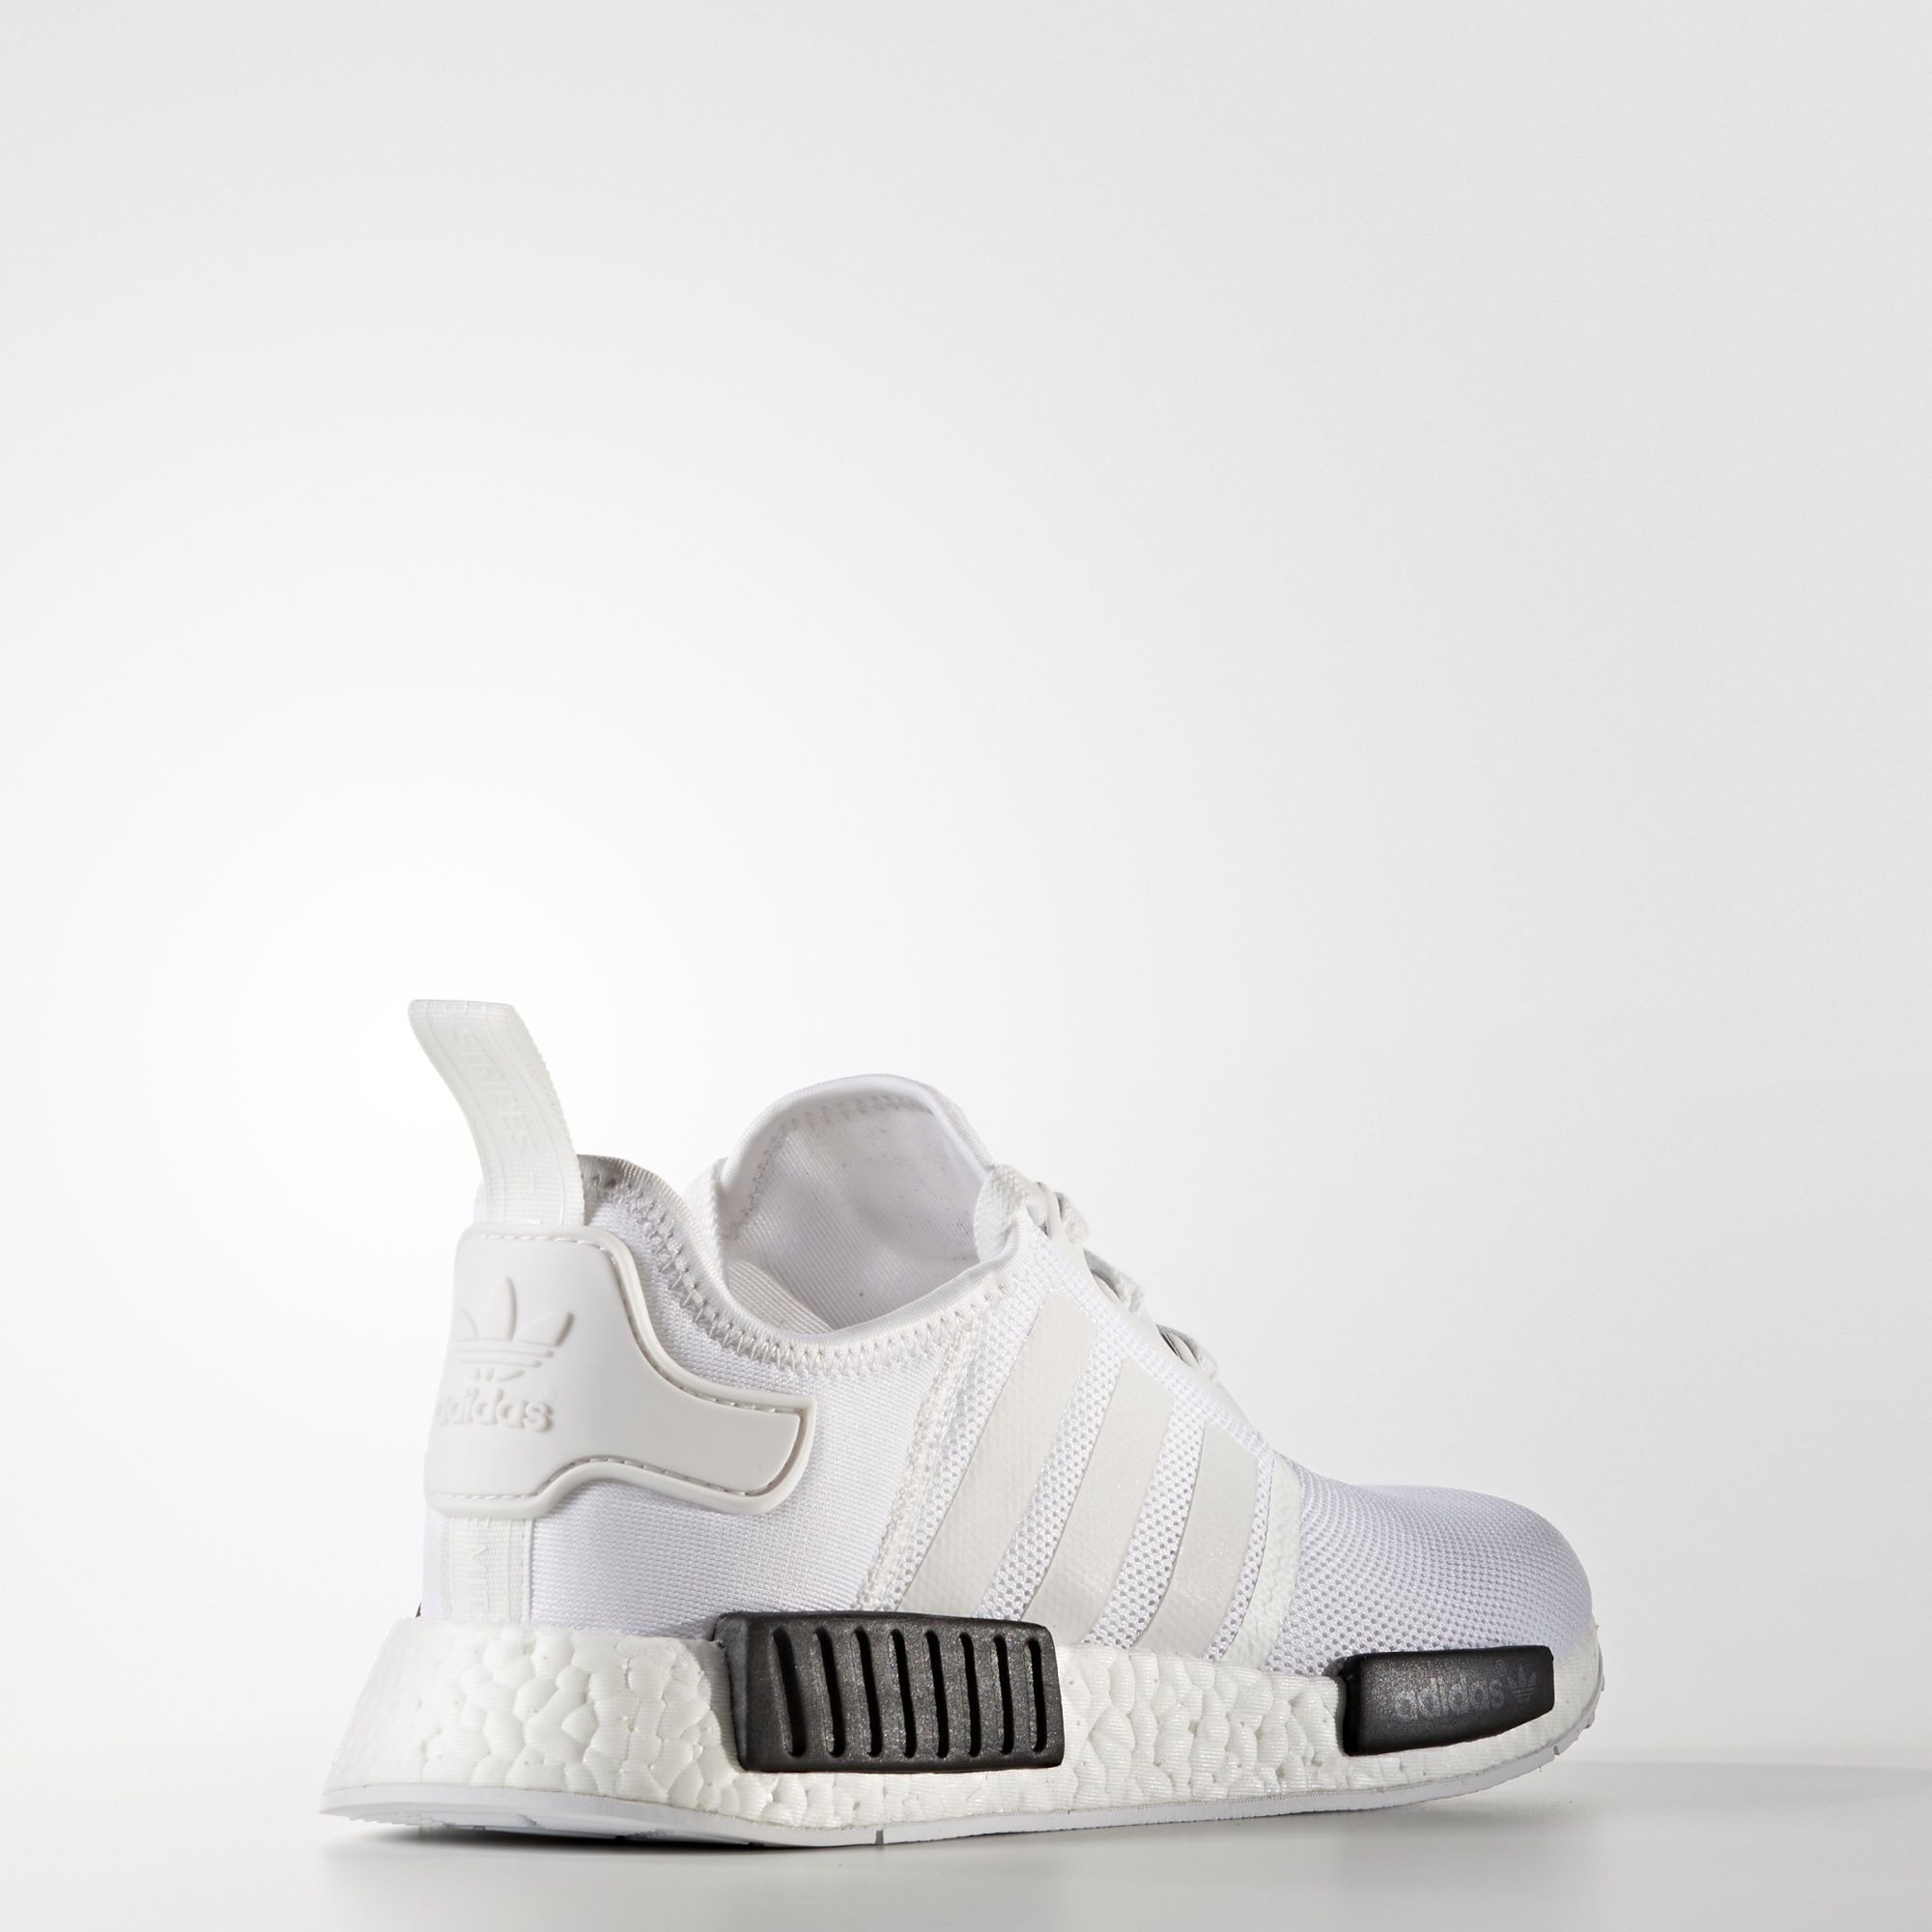 adidas nmd blanche et rouge